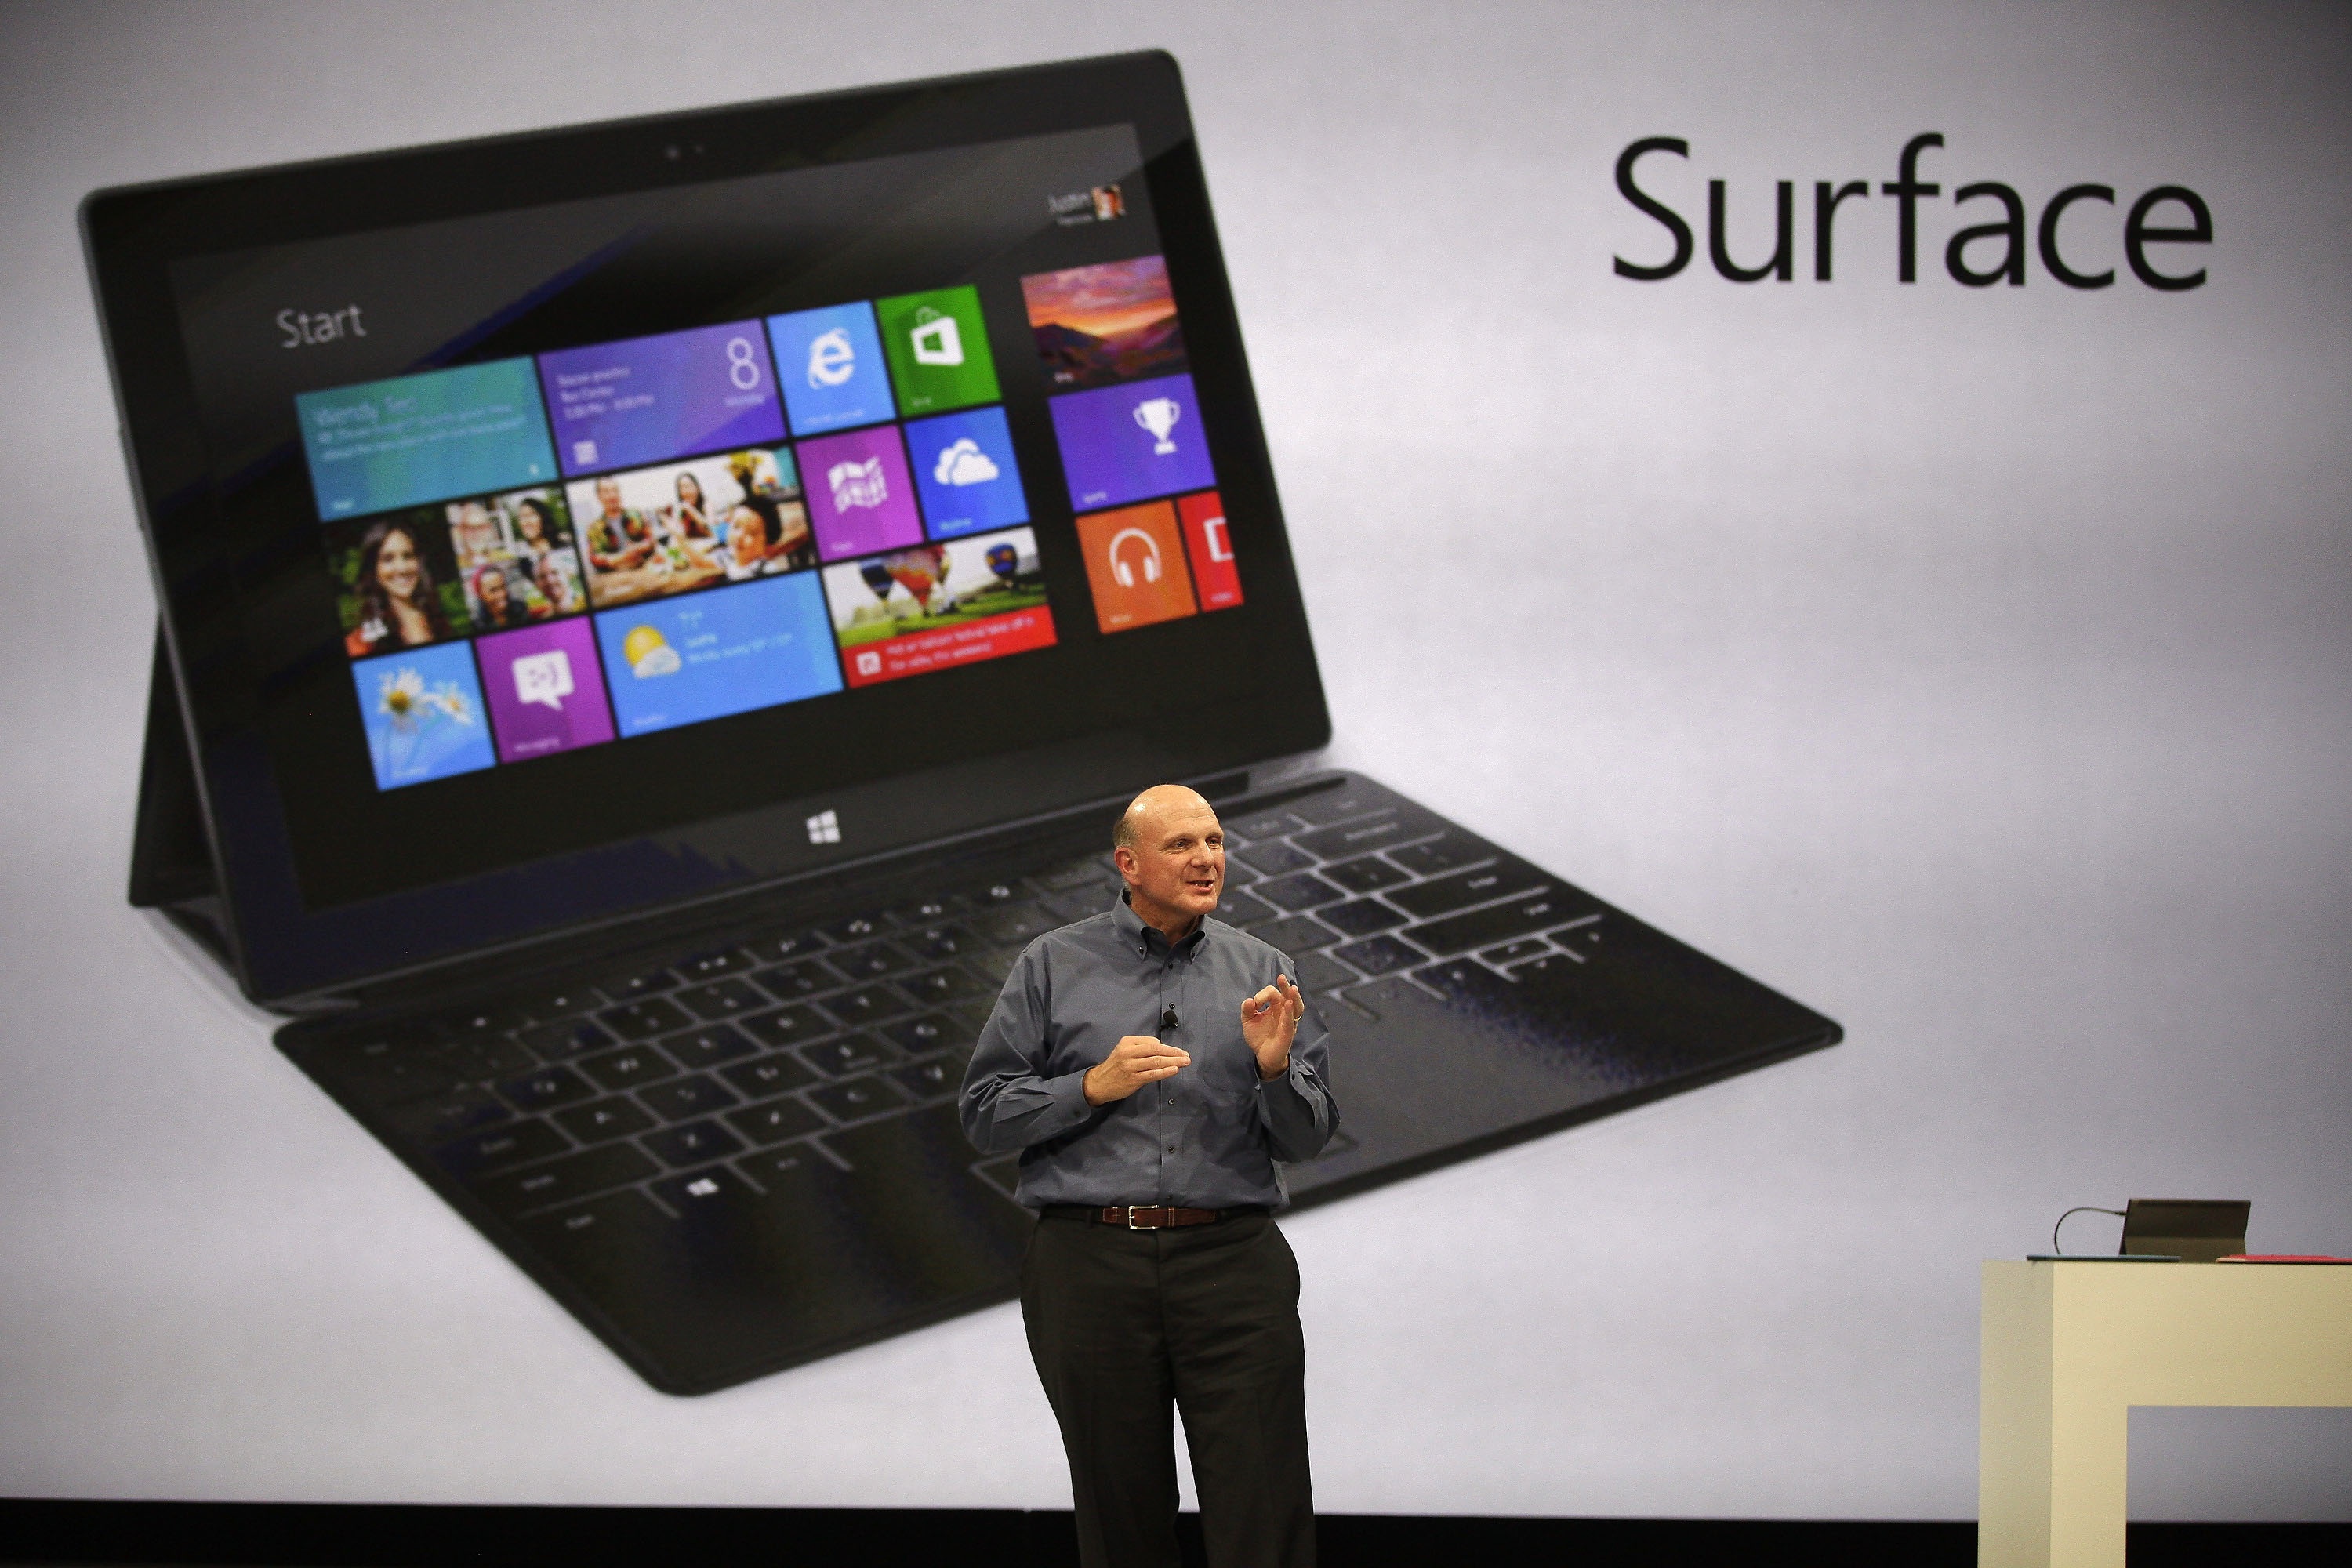 Microsoft CEO Steve Baller announces 'Surface' as a photo of the new tablet is shown behind him. The Associated Press